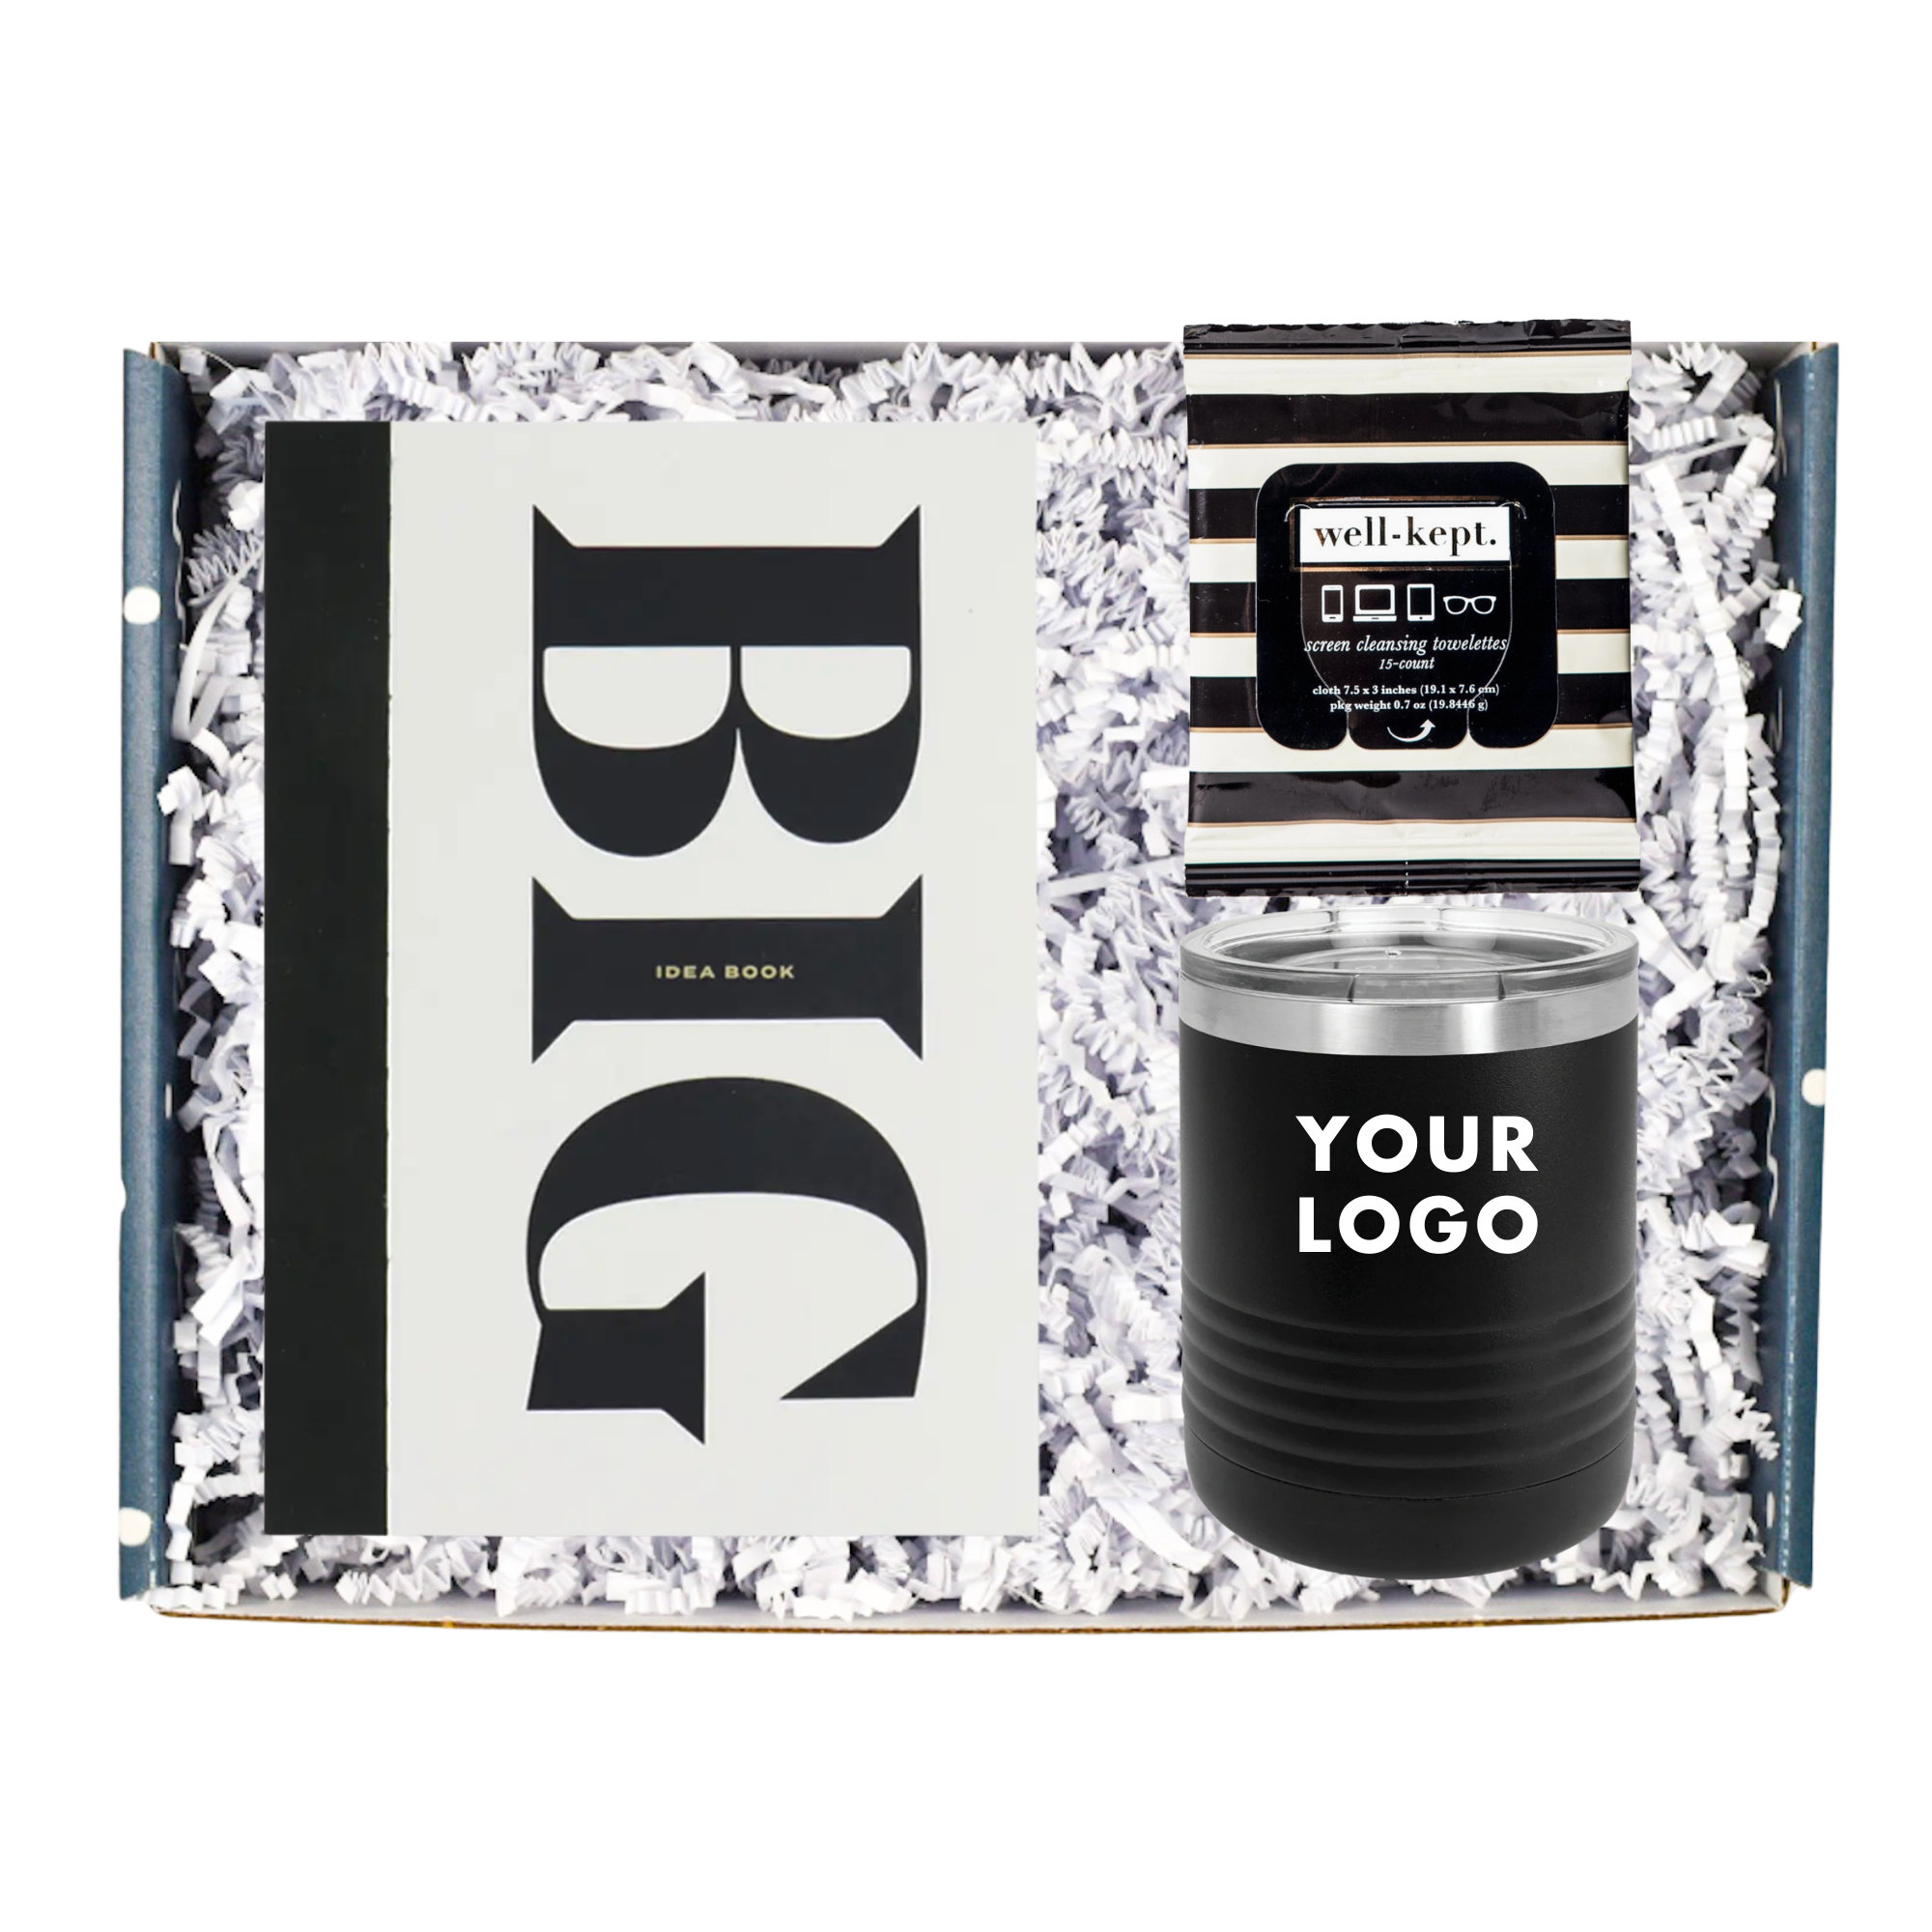 This gift box includes:   Big idea sketchbook Branded stainless steel tumbler  Screen cleaning wipes  Gift Message (you can enter the message at checkout)